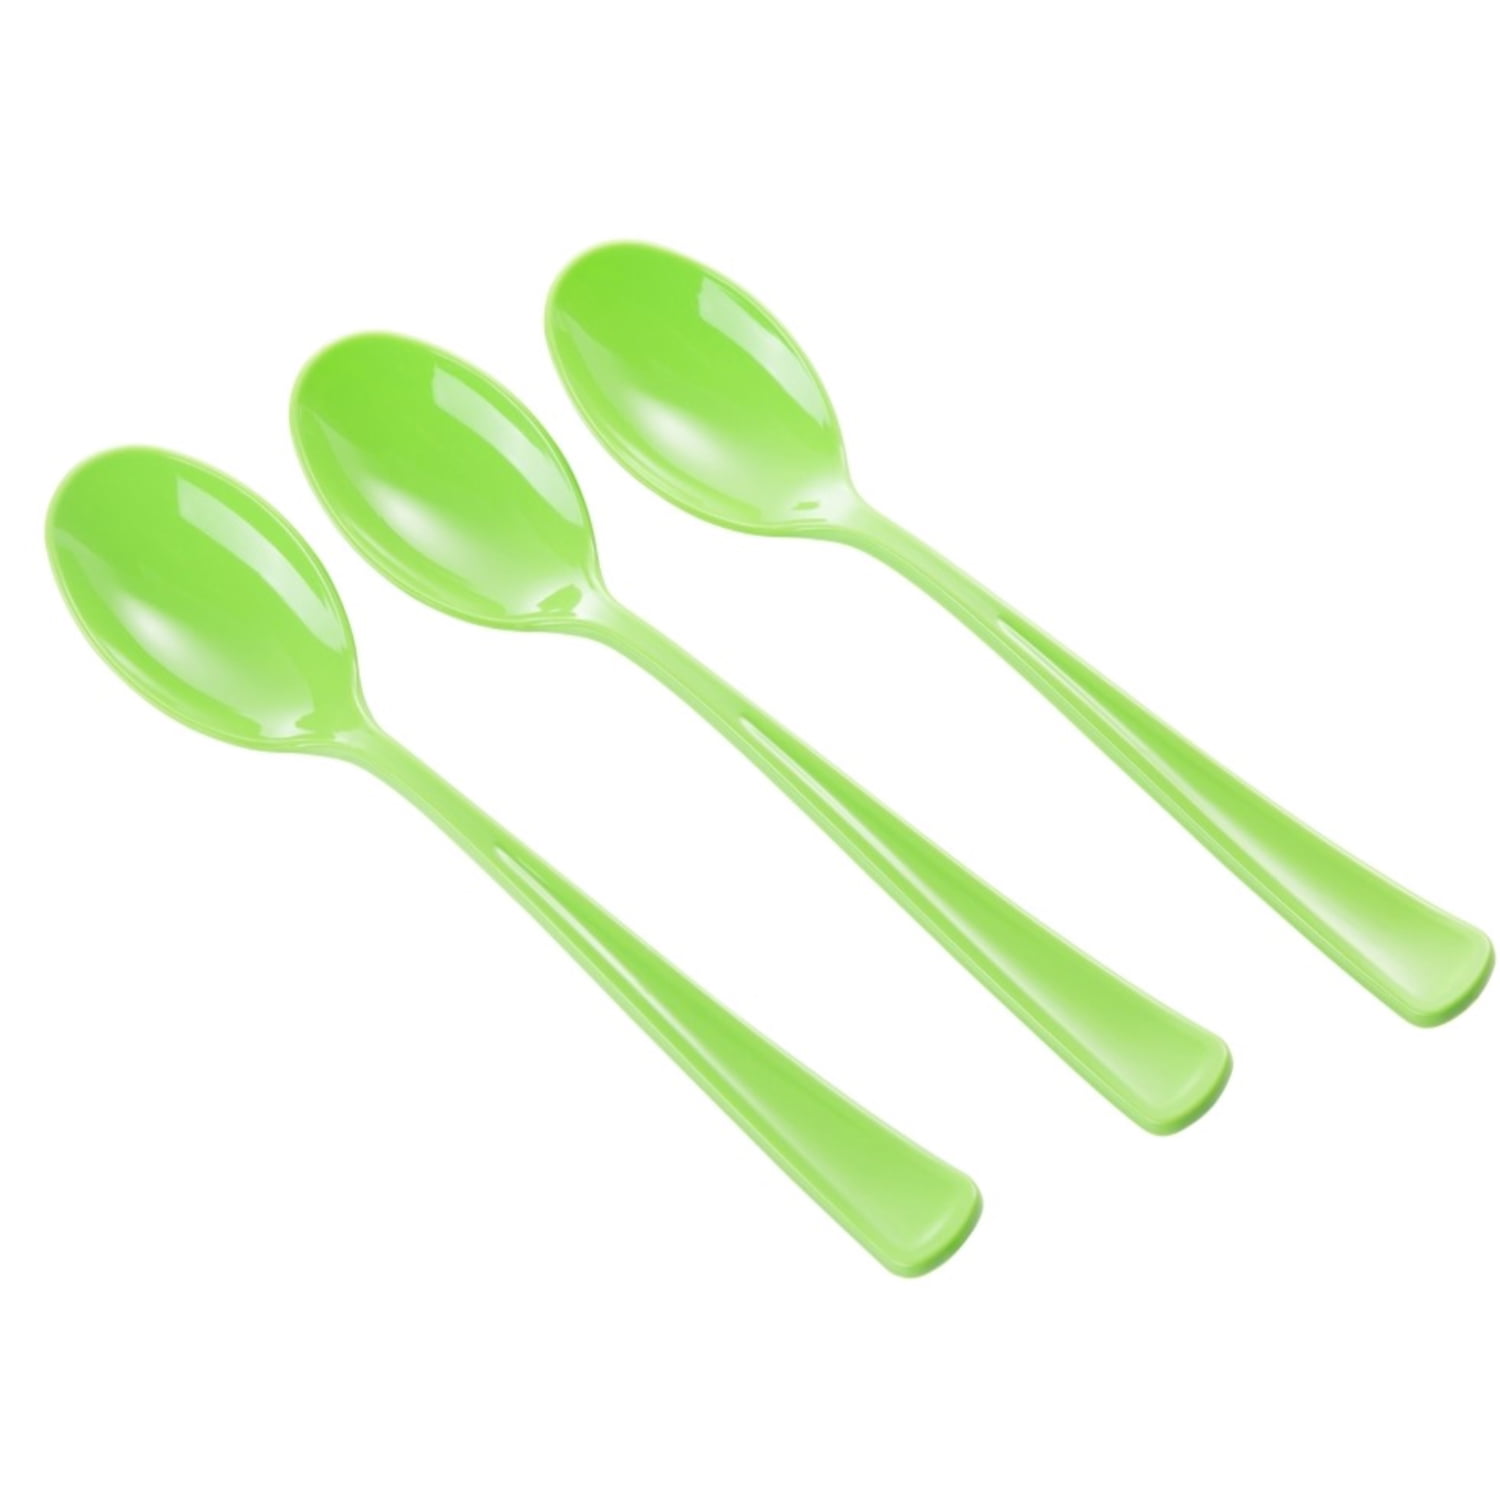 Get Clean® Measuring Spoons (25 pk), Accessories, Household Cleaning, Green Home